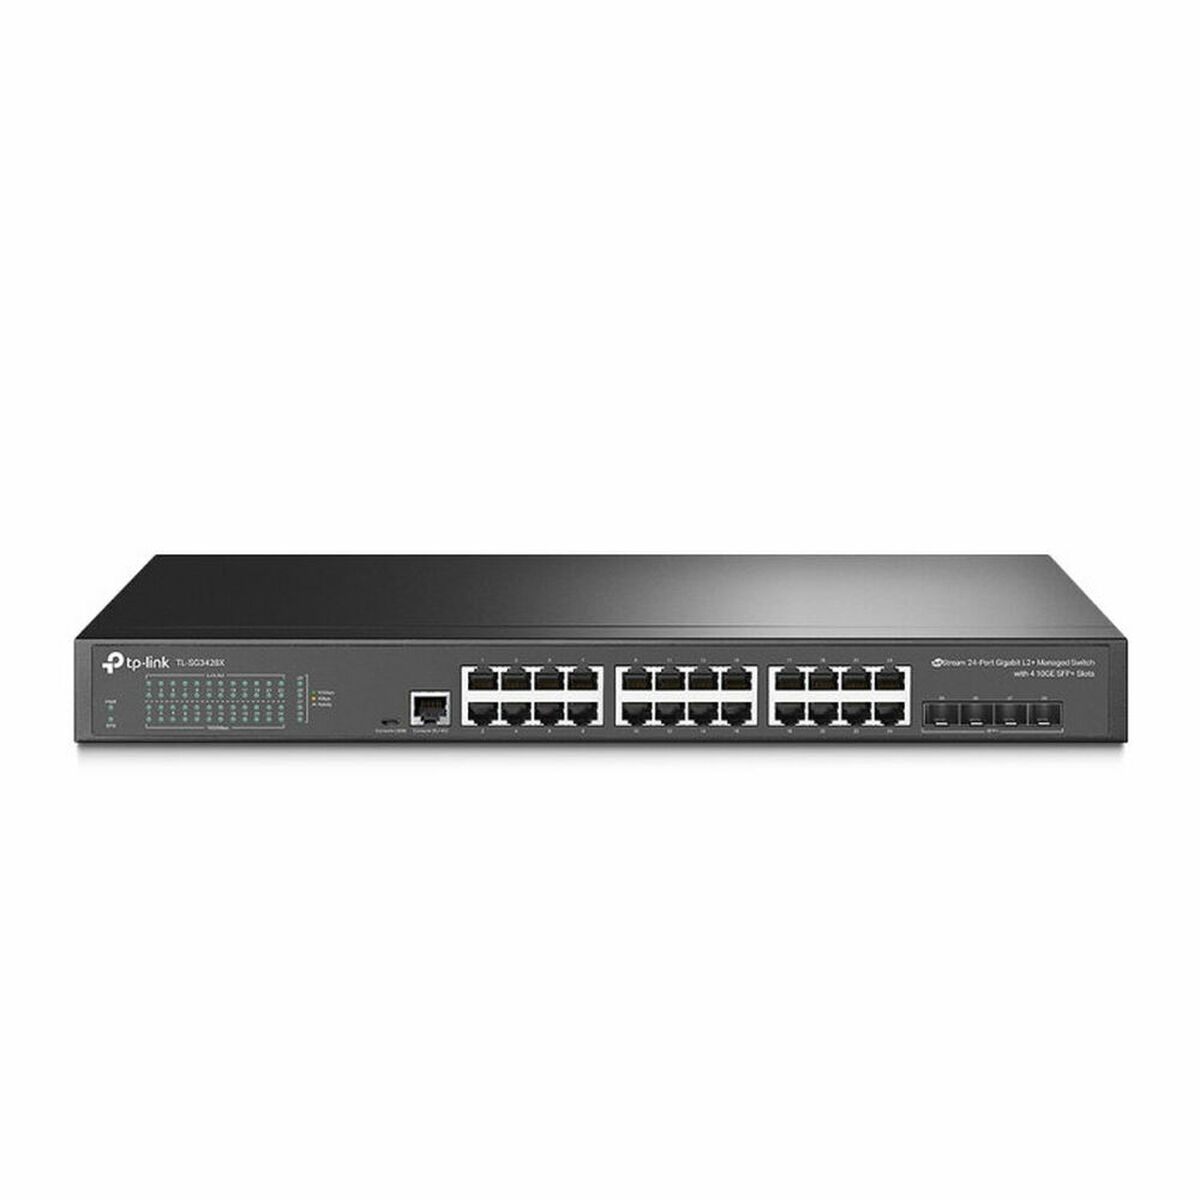 TL-SG3428X 28 Switch TP-LINK